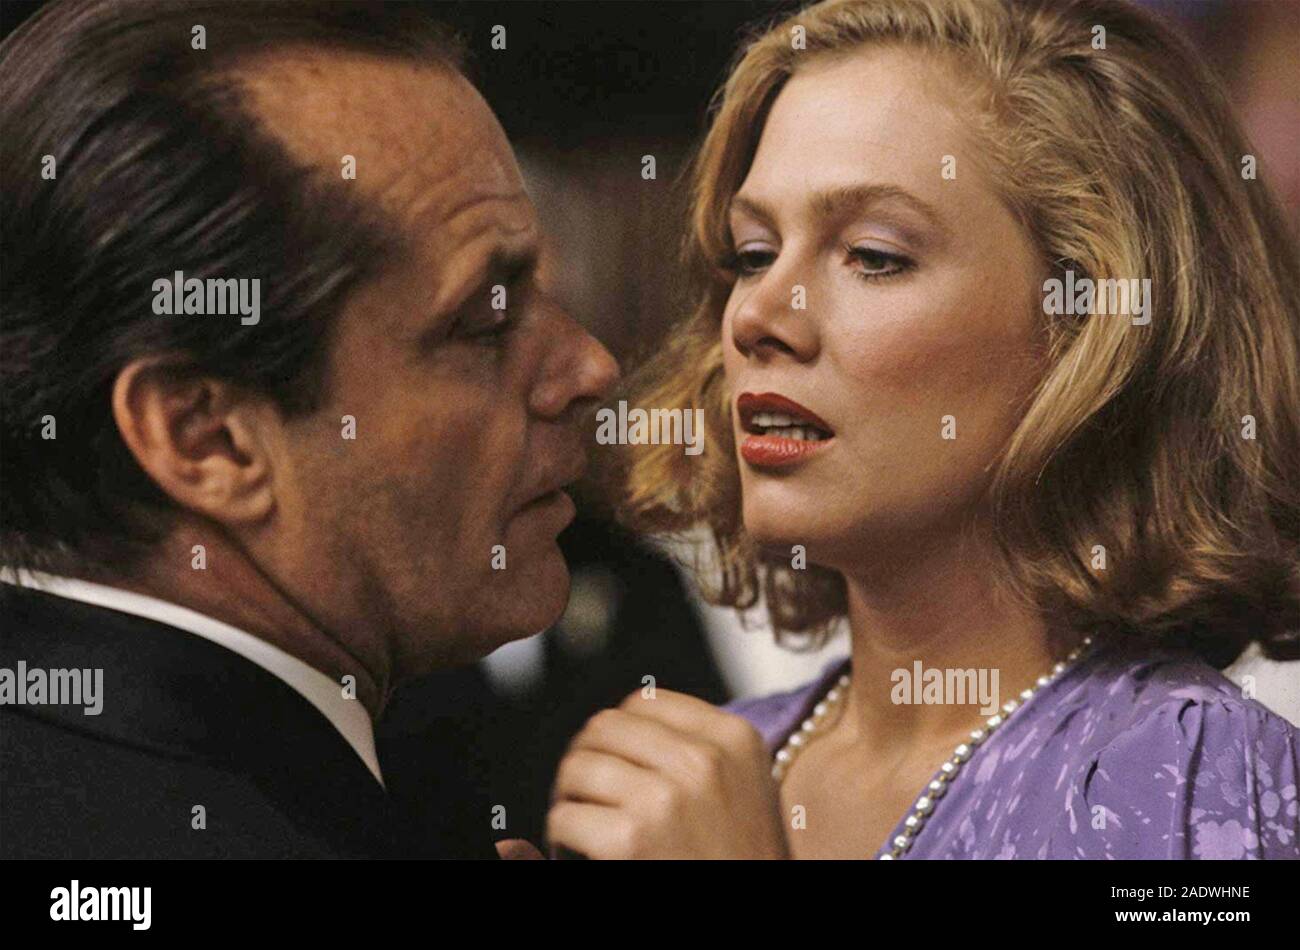 PRIZZI'S HONOR 1985 ABC Motion Pictures film with Kathleen Turner and Jack Nicholson Stock Photo